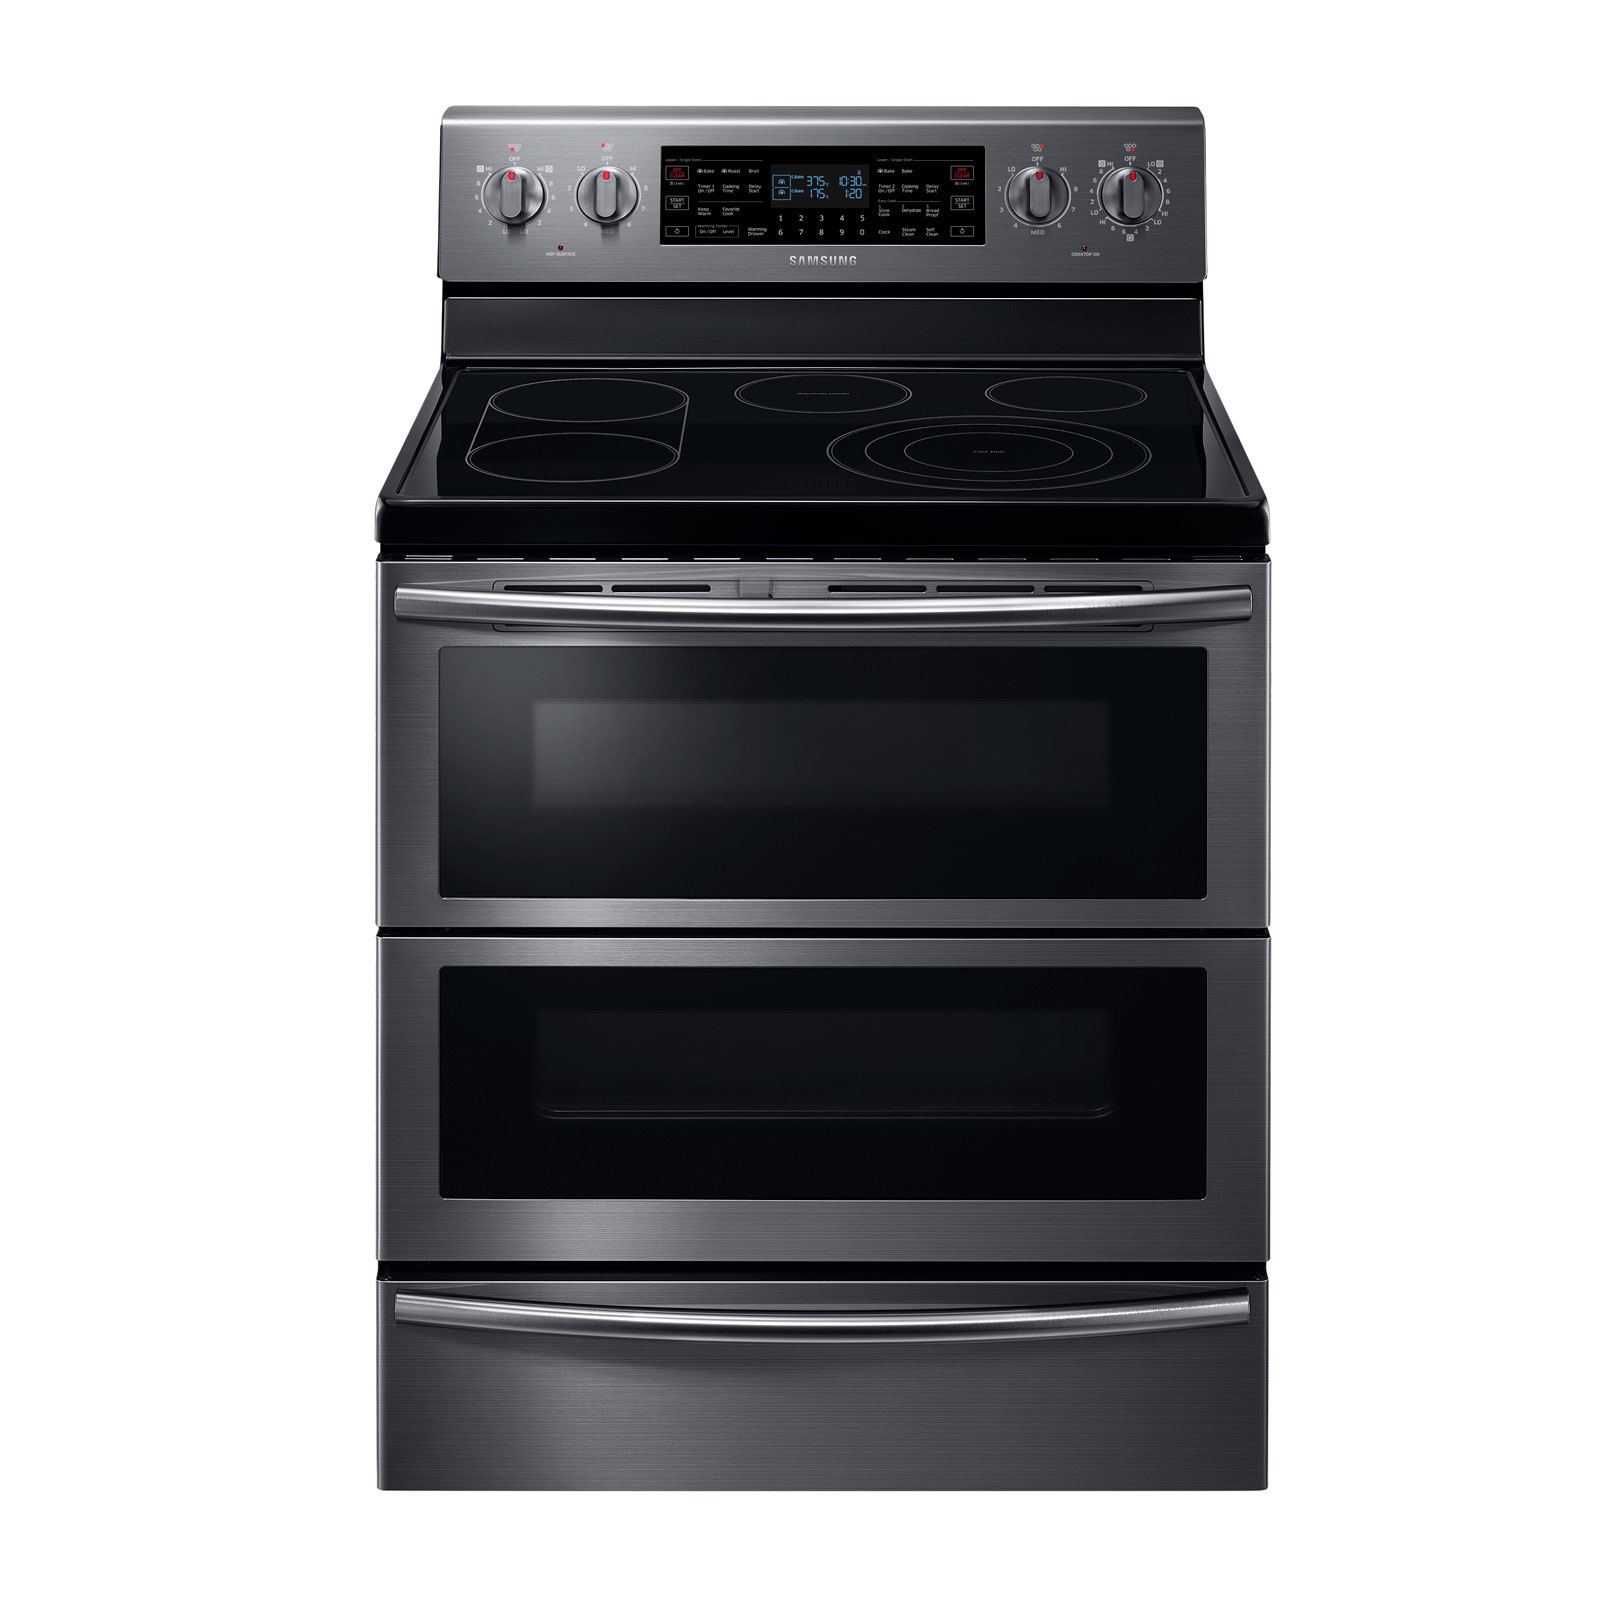 Samsung NE59J7850WG/AA 5.9 cu. ft. Freestanding Electric Range with Samsung Black Stainless Steel Electric Stove